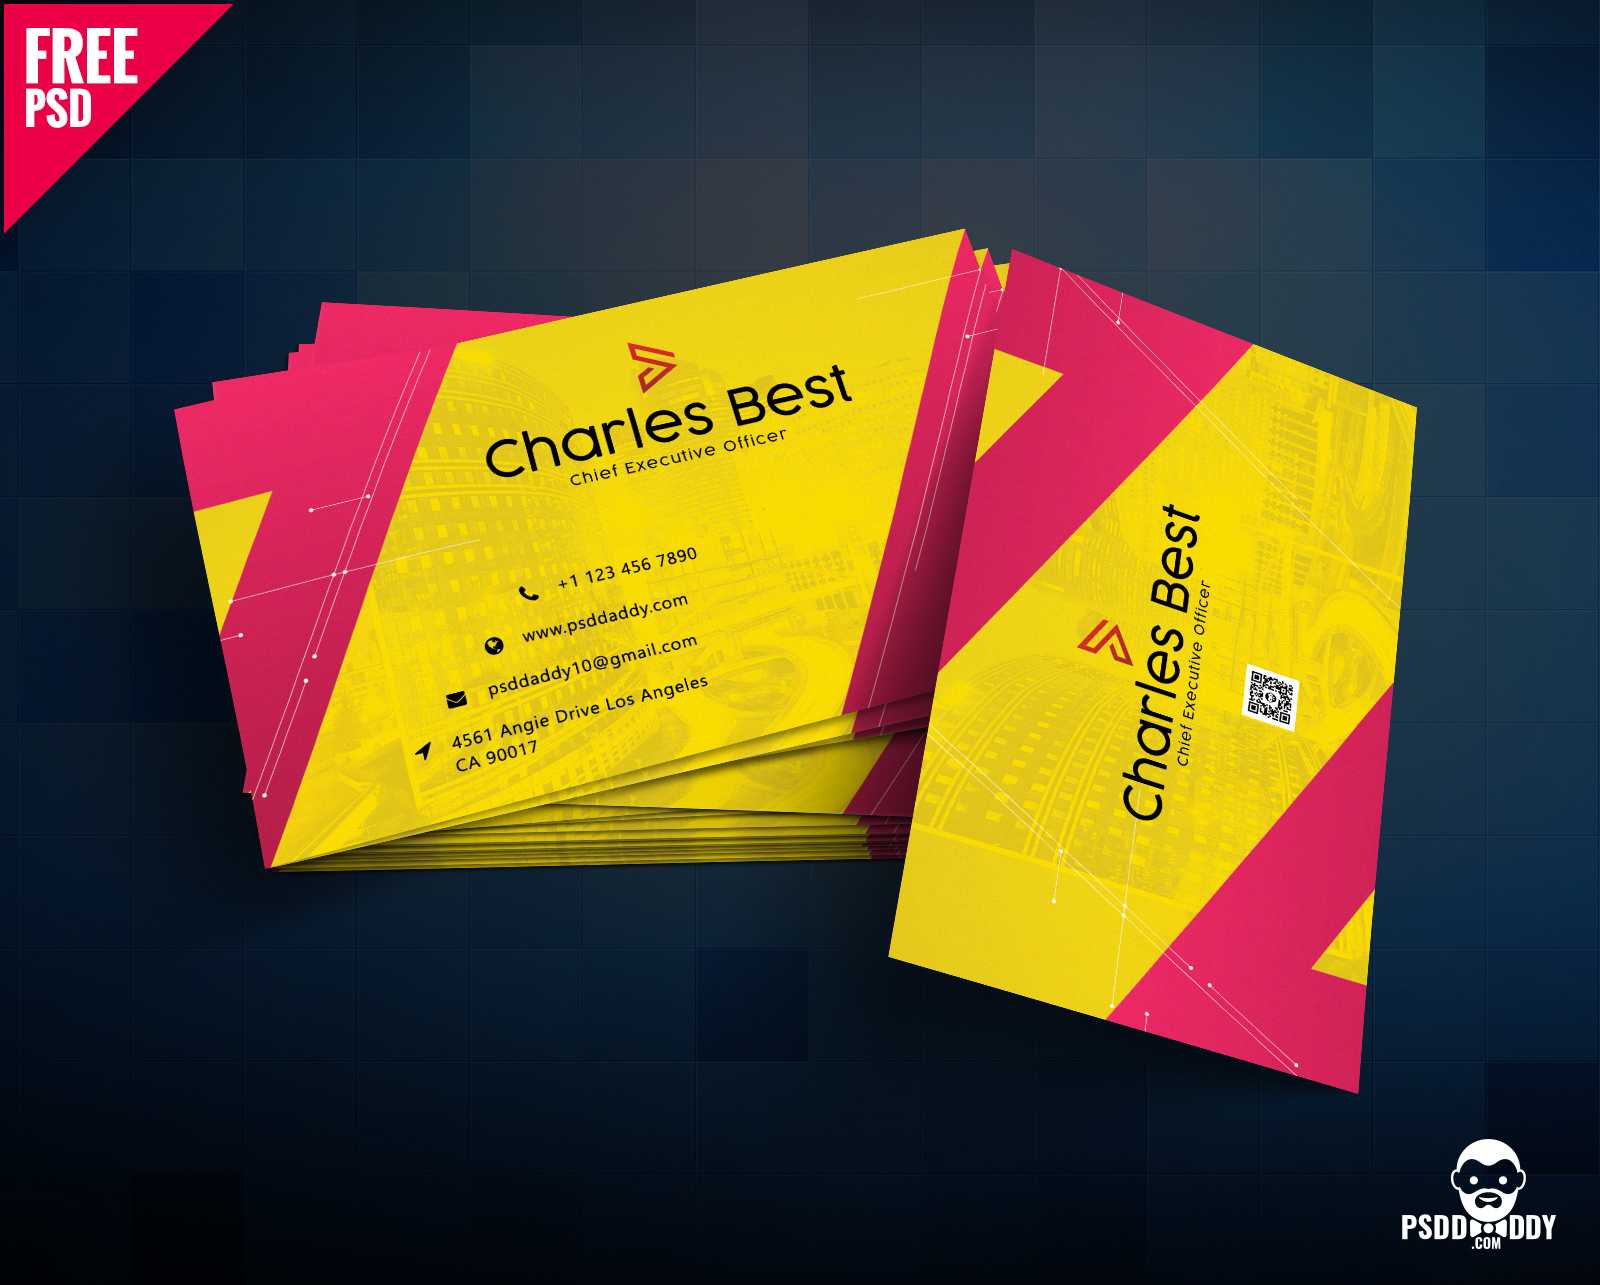 Download] Creative Business Card Free Psd | Psddaddy Inside Name Card Photoshop Template